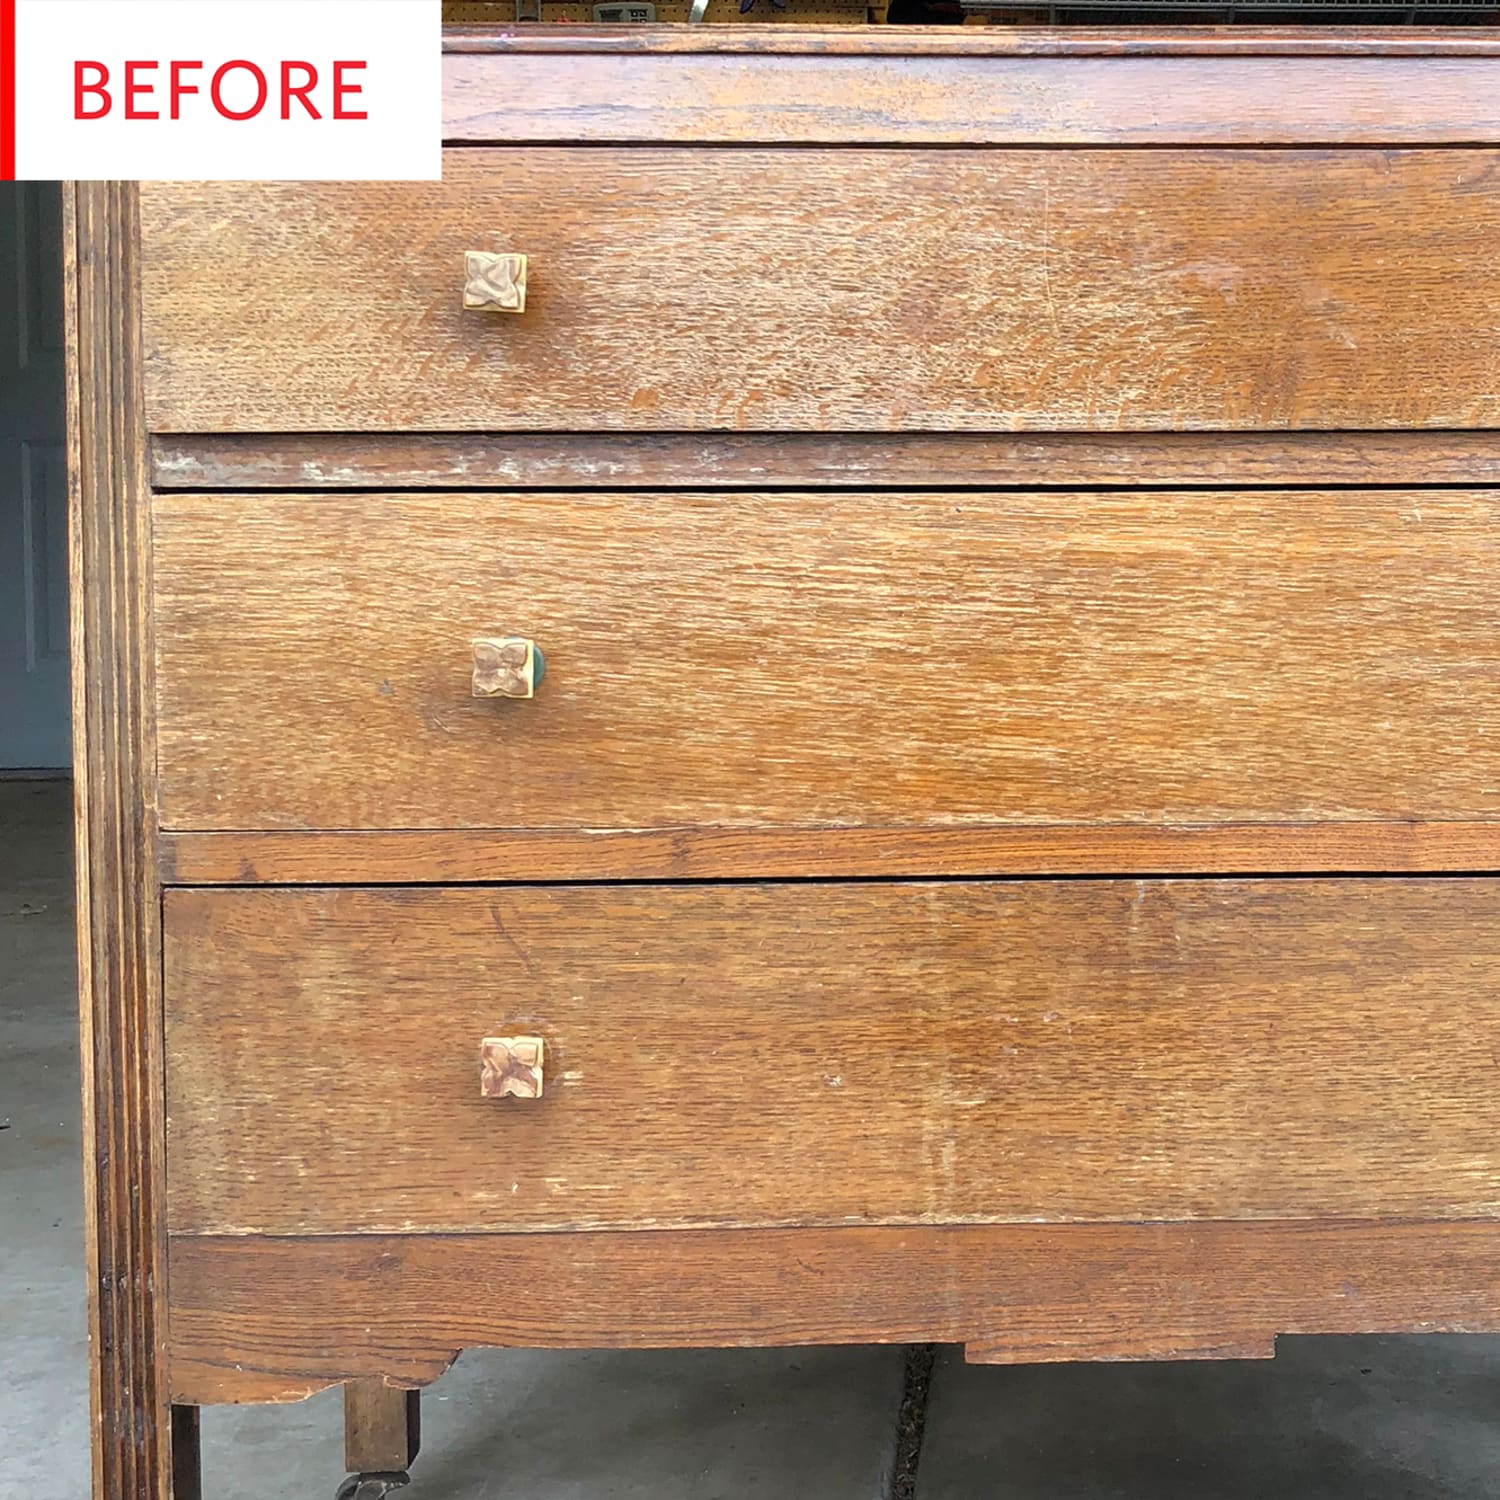 Wood Dresser New Wax Finish - Before and After Photos